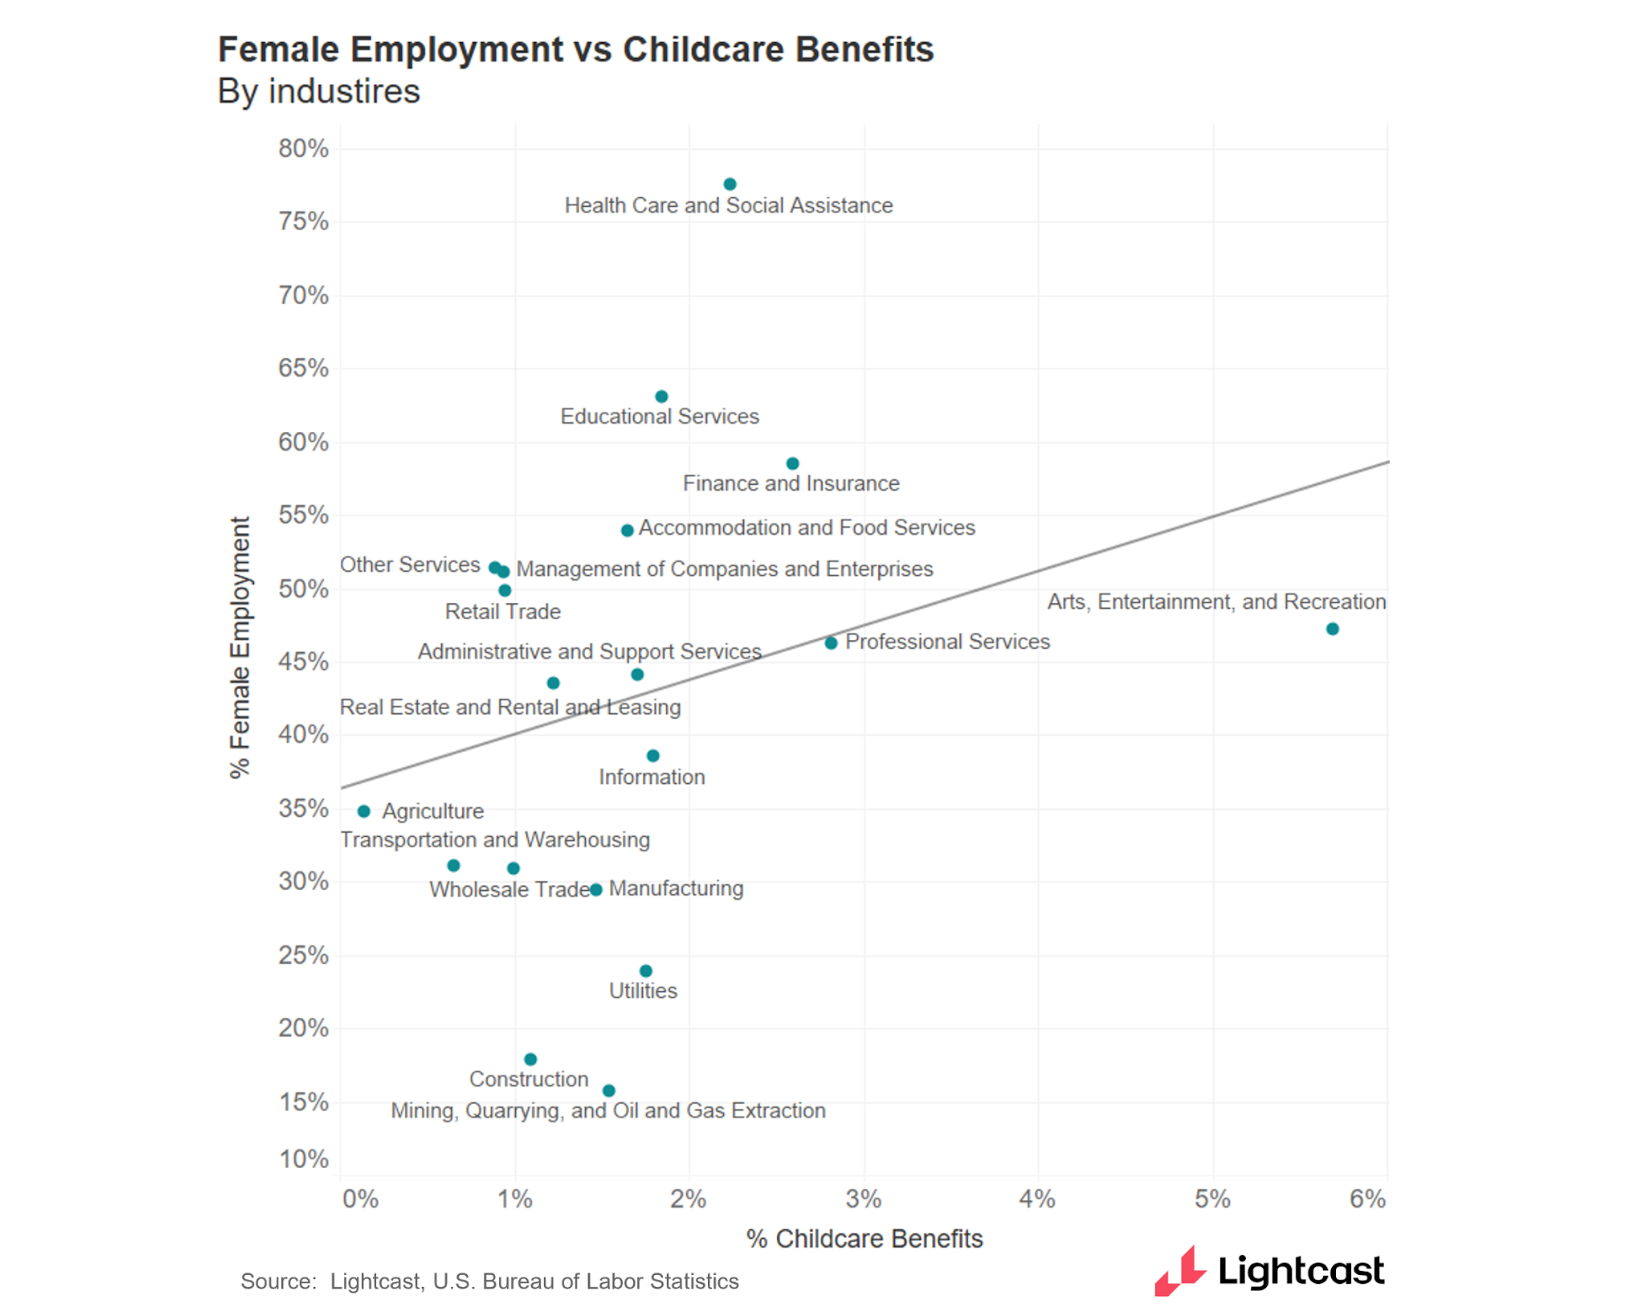 Female employment as compared to childcare benefits